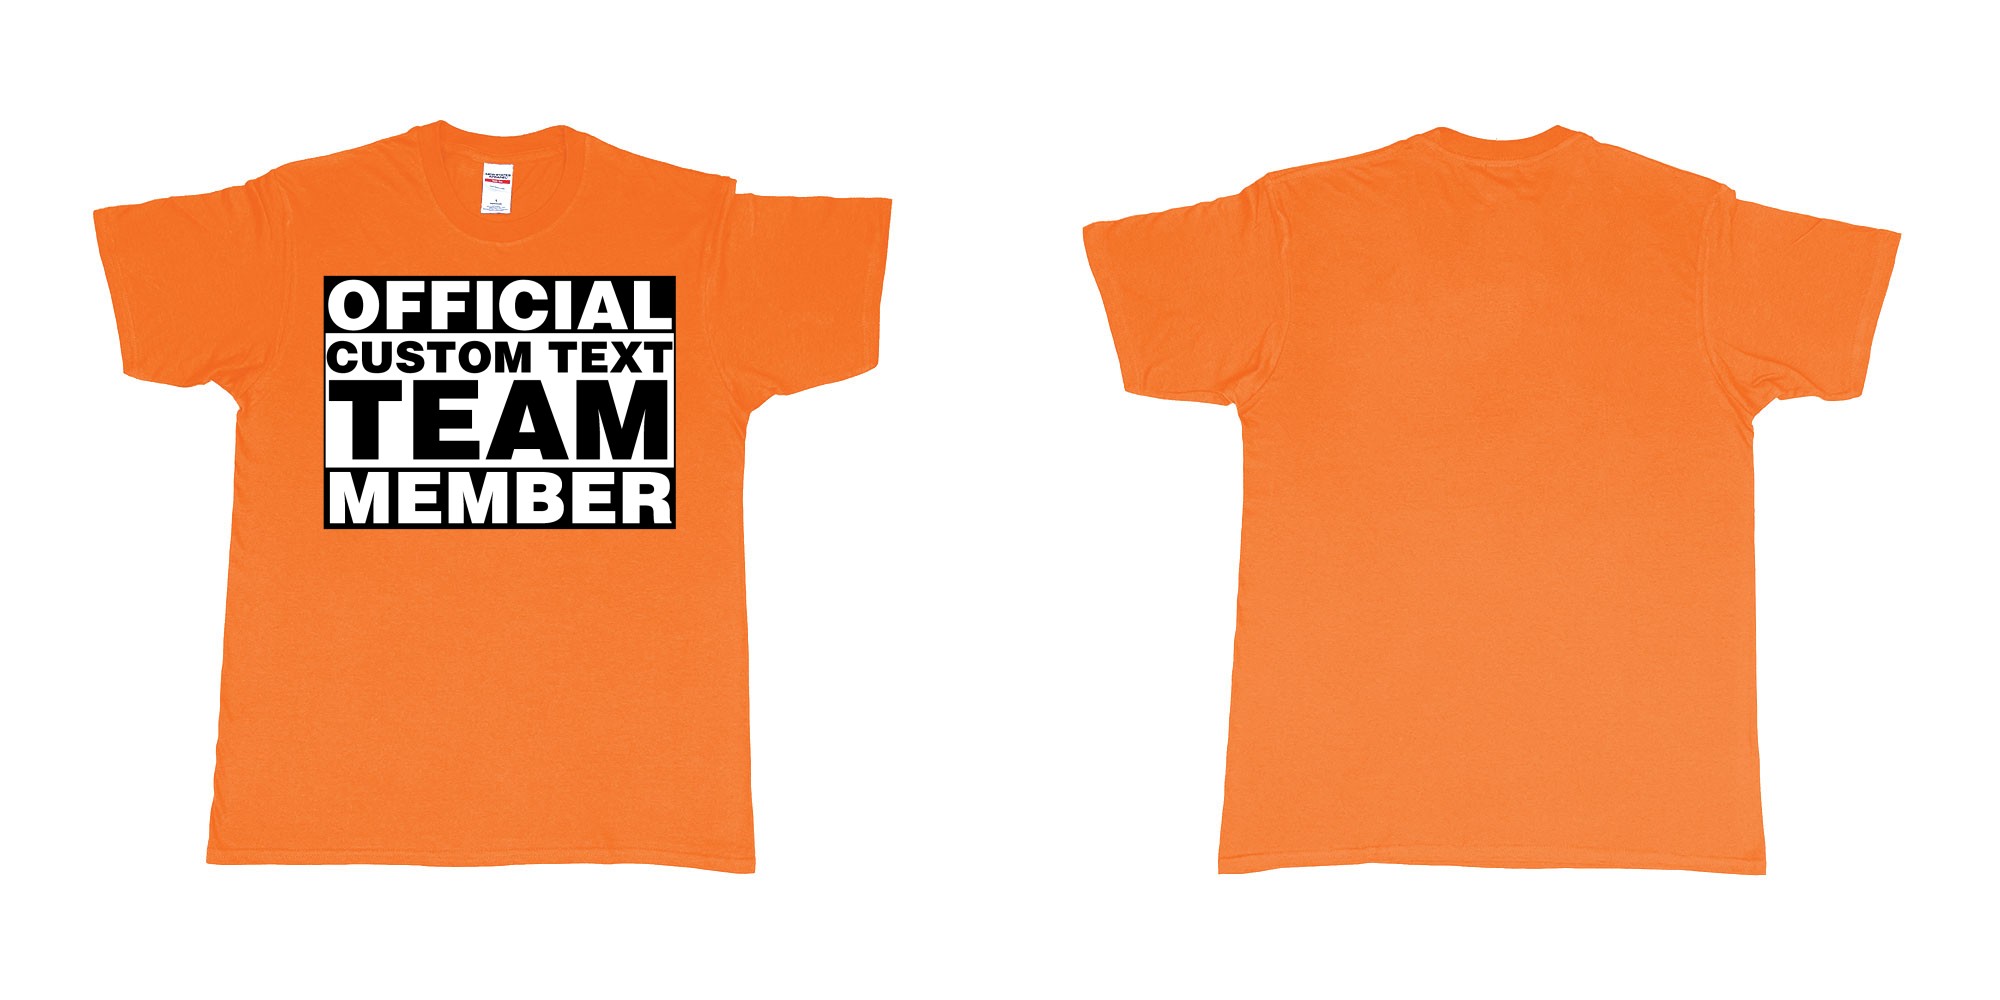 Custom tshirt design official custom text team member in fabric color orange choice your own text made in Bali by The Pirate Way